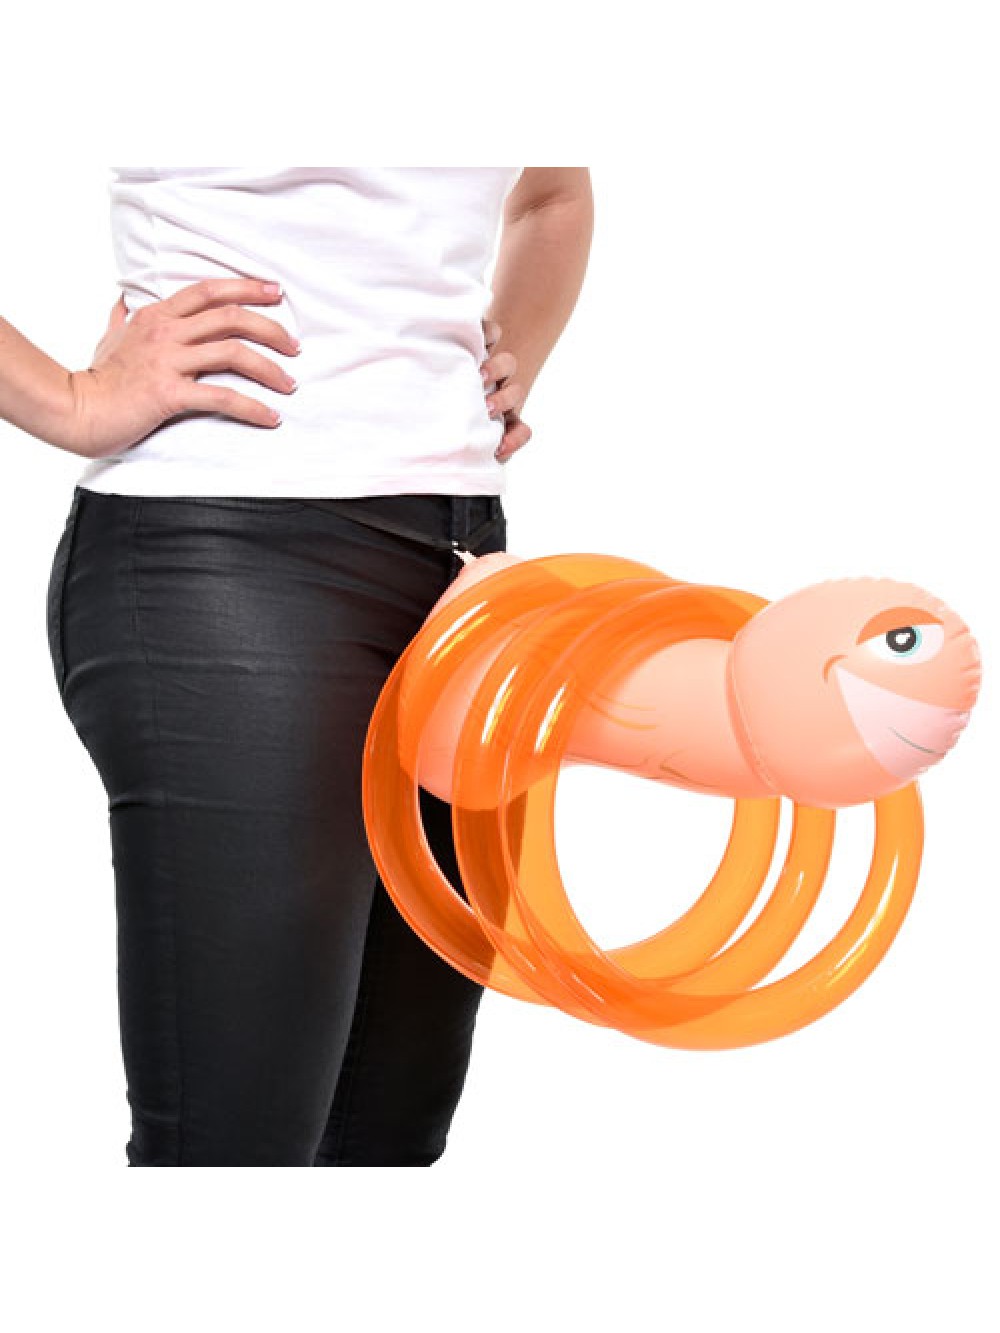 Mr Party Pecker Inflatable Ring Toss Game 603912283723